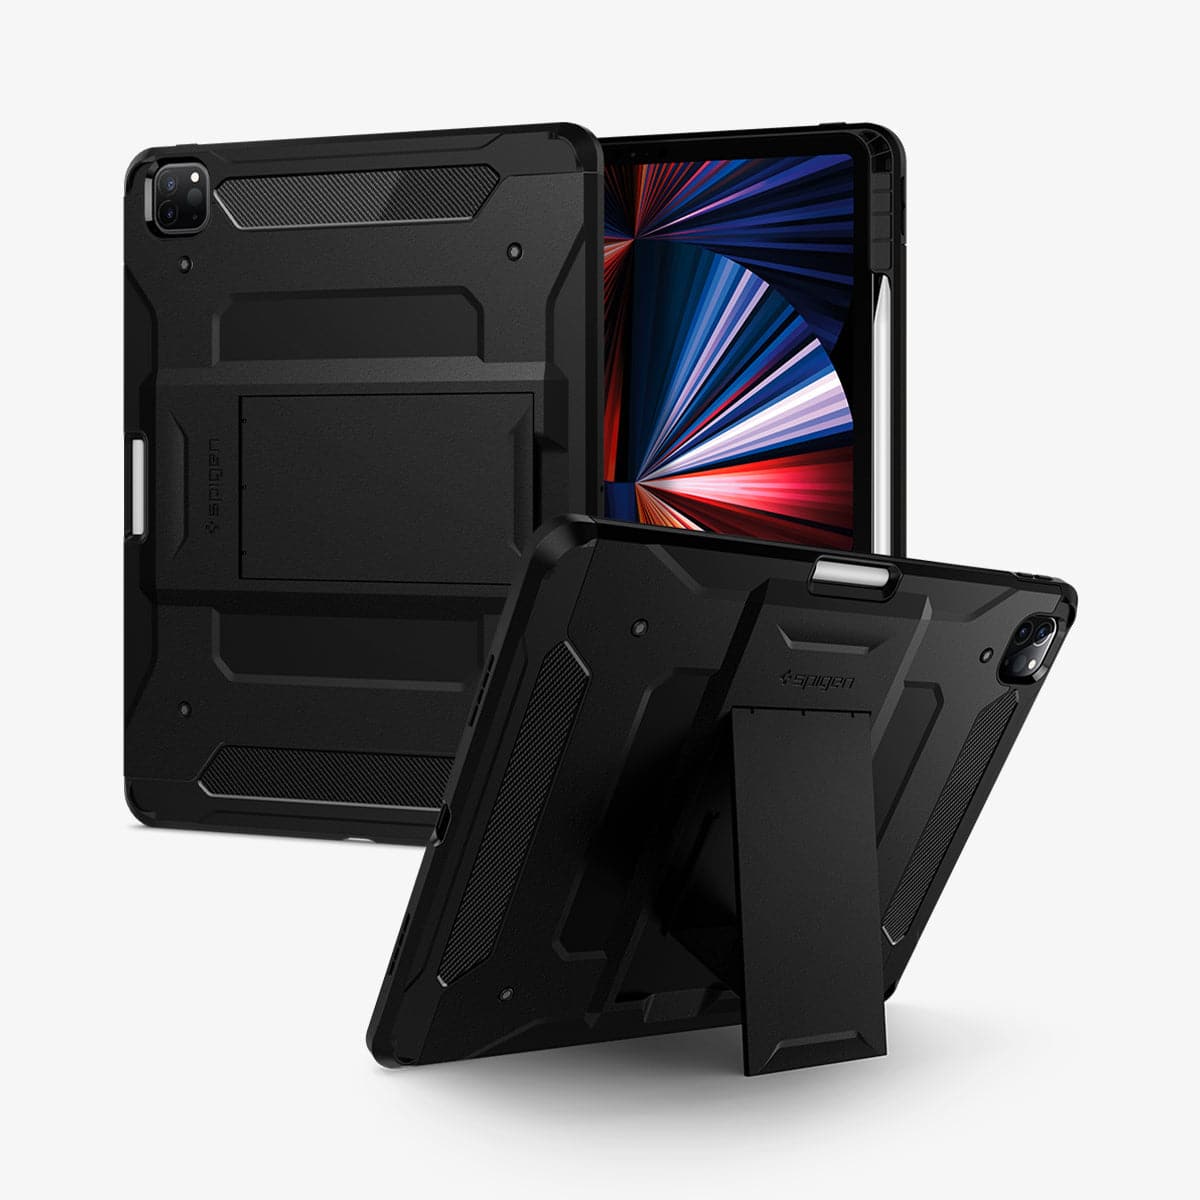 ACS02881 - iPad Pro 12.9" Case Tough Armor Pro in black showing the back, front and device propped up by built in kickstand